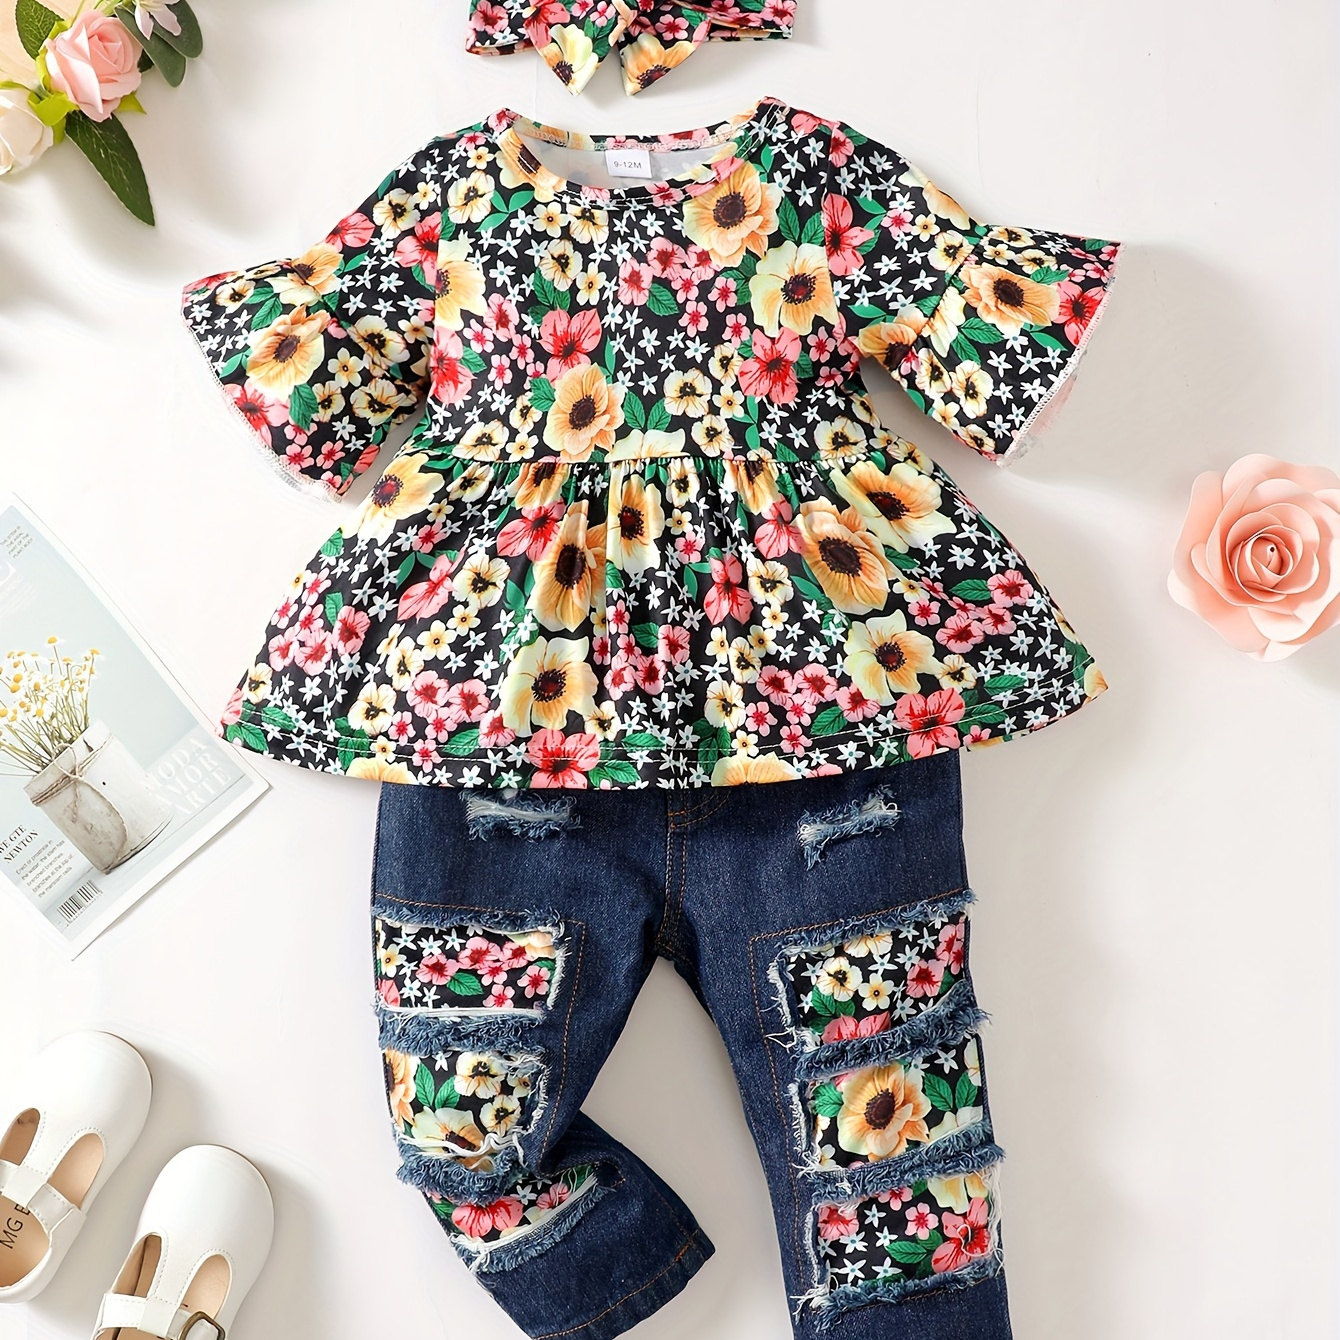 

Baby's Flower Full Print 2pcs Casual Outfit, Trumpet Sleeve Peplum Top & Patchwork Jeans & Headband Set, Toddler & Infant Girl's Clothes For Daily Wear